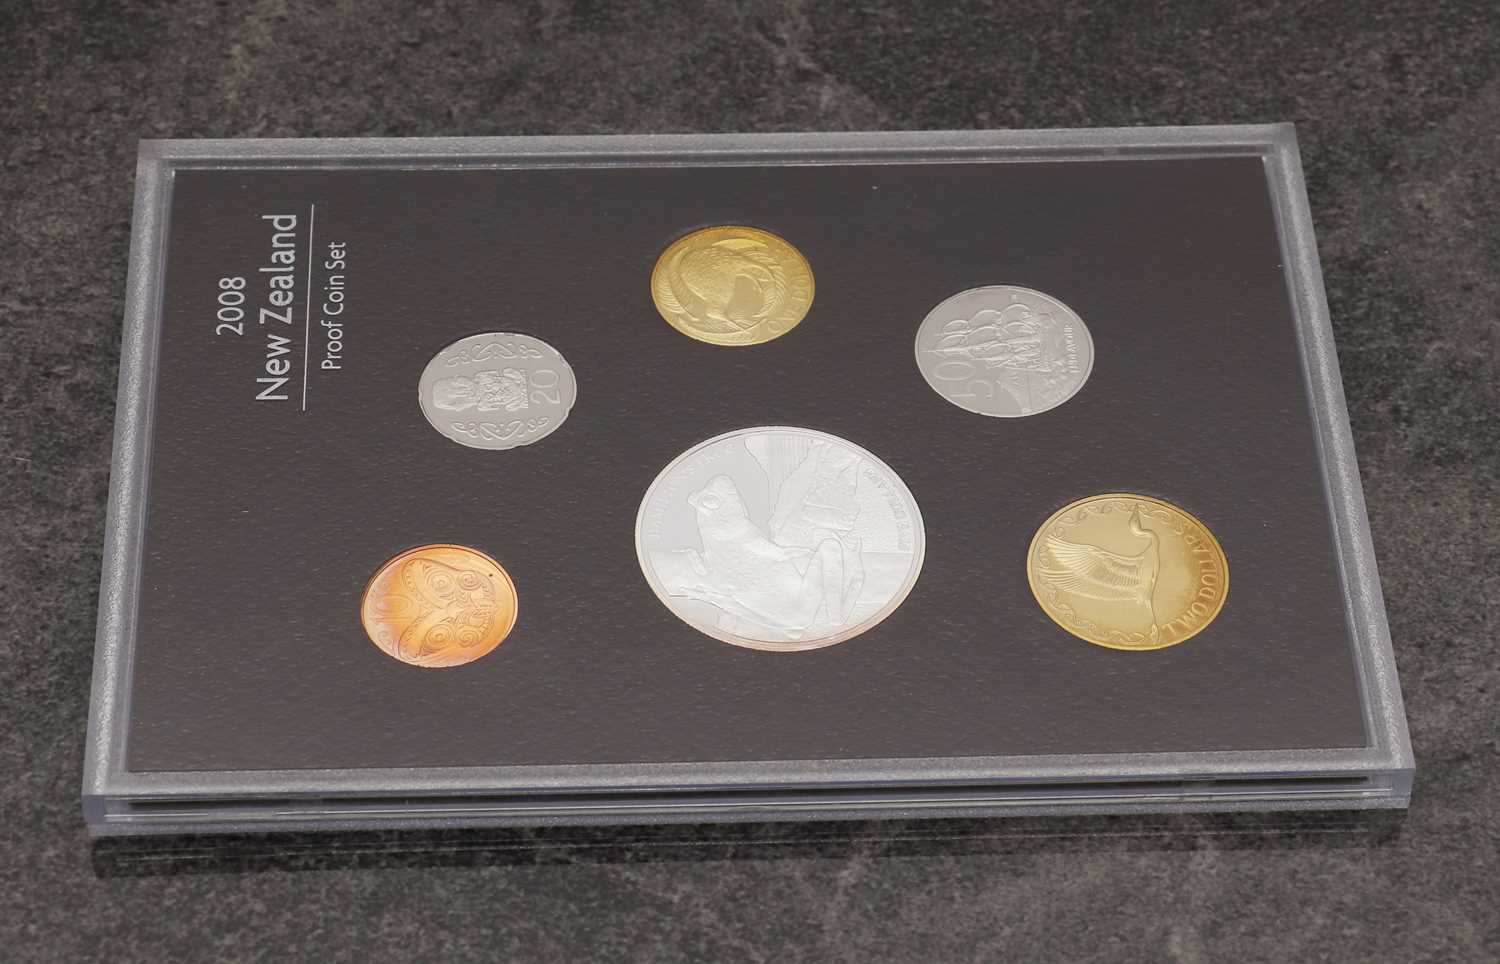 A collection of uncirculated Australian New Zealand mint coins, - Image 18 of 18